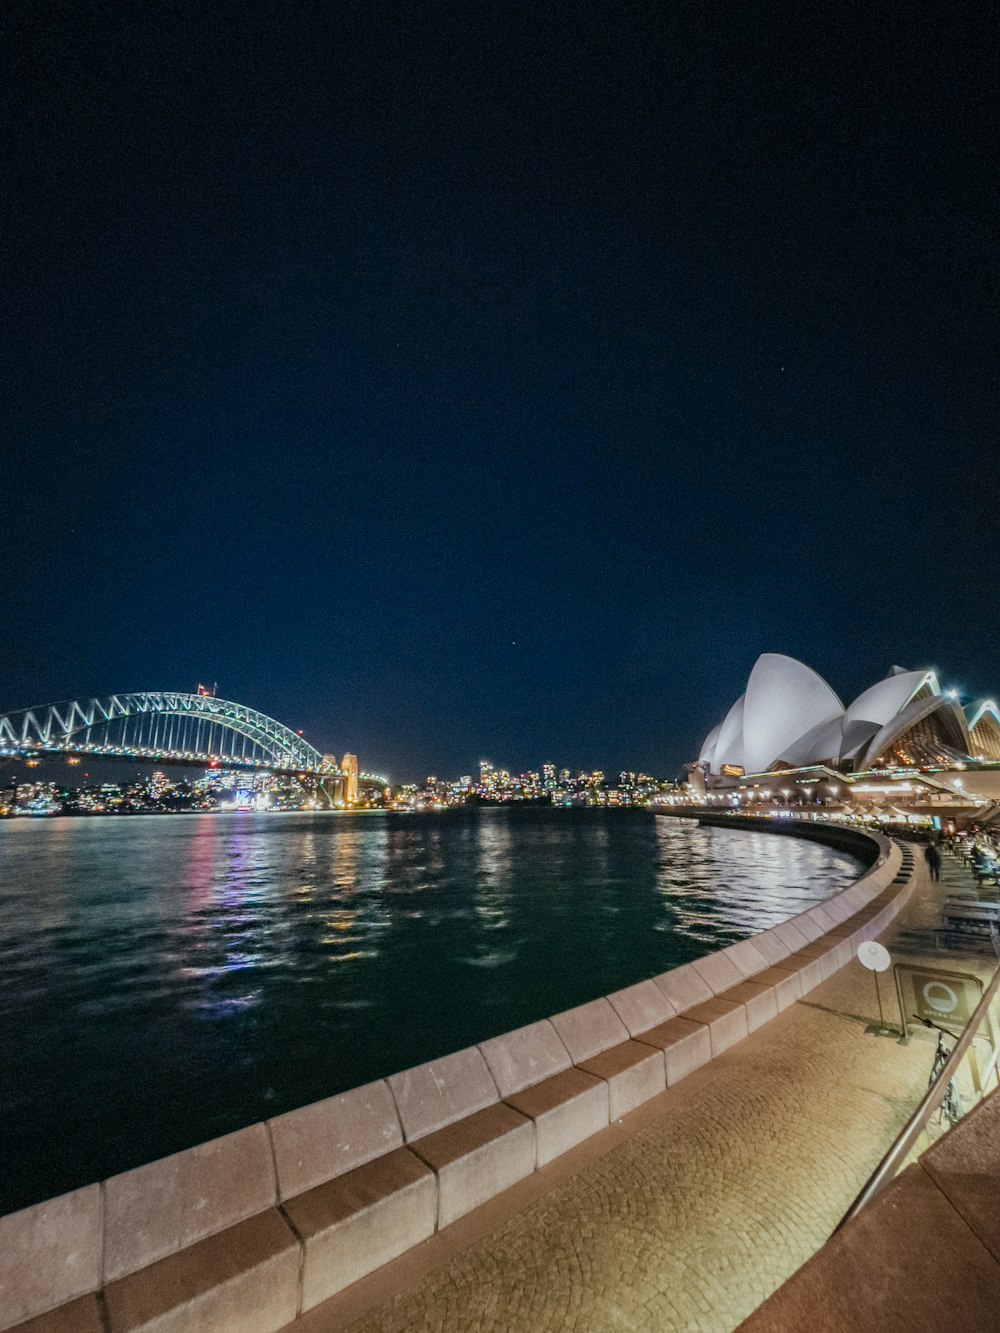 a view of the sydney opera and the sydney bridge at night